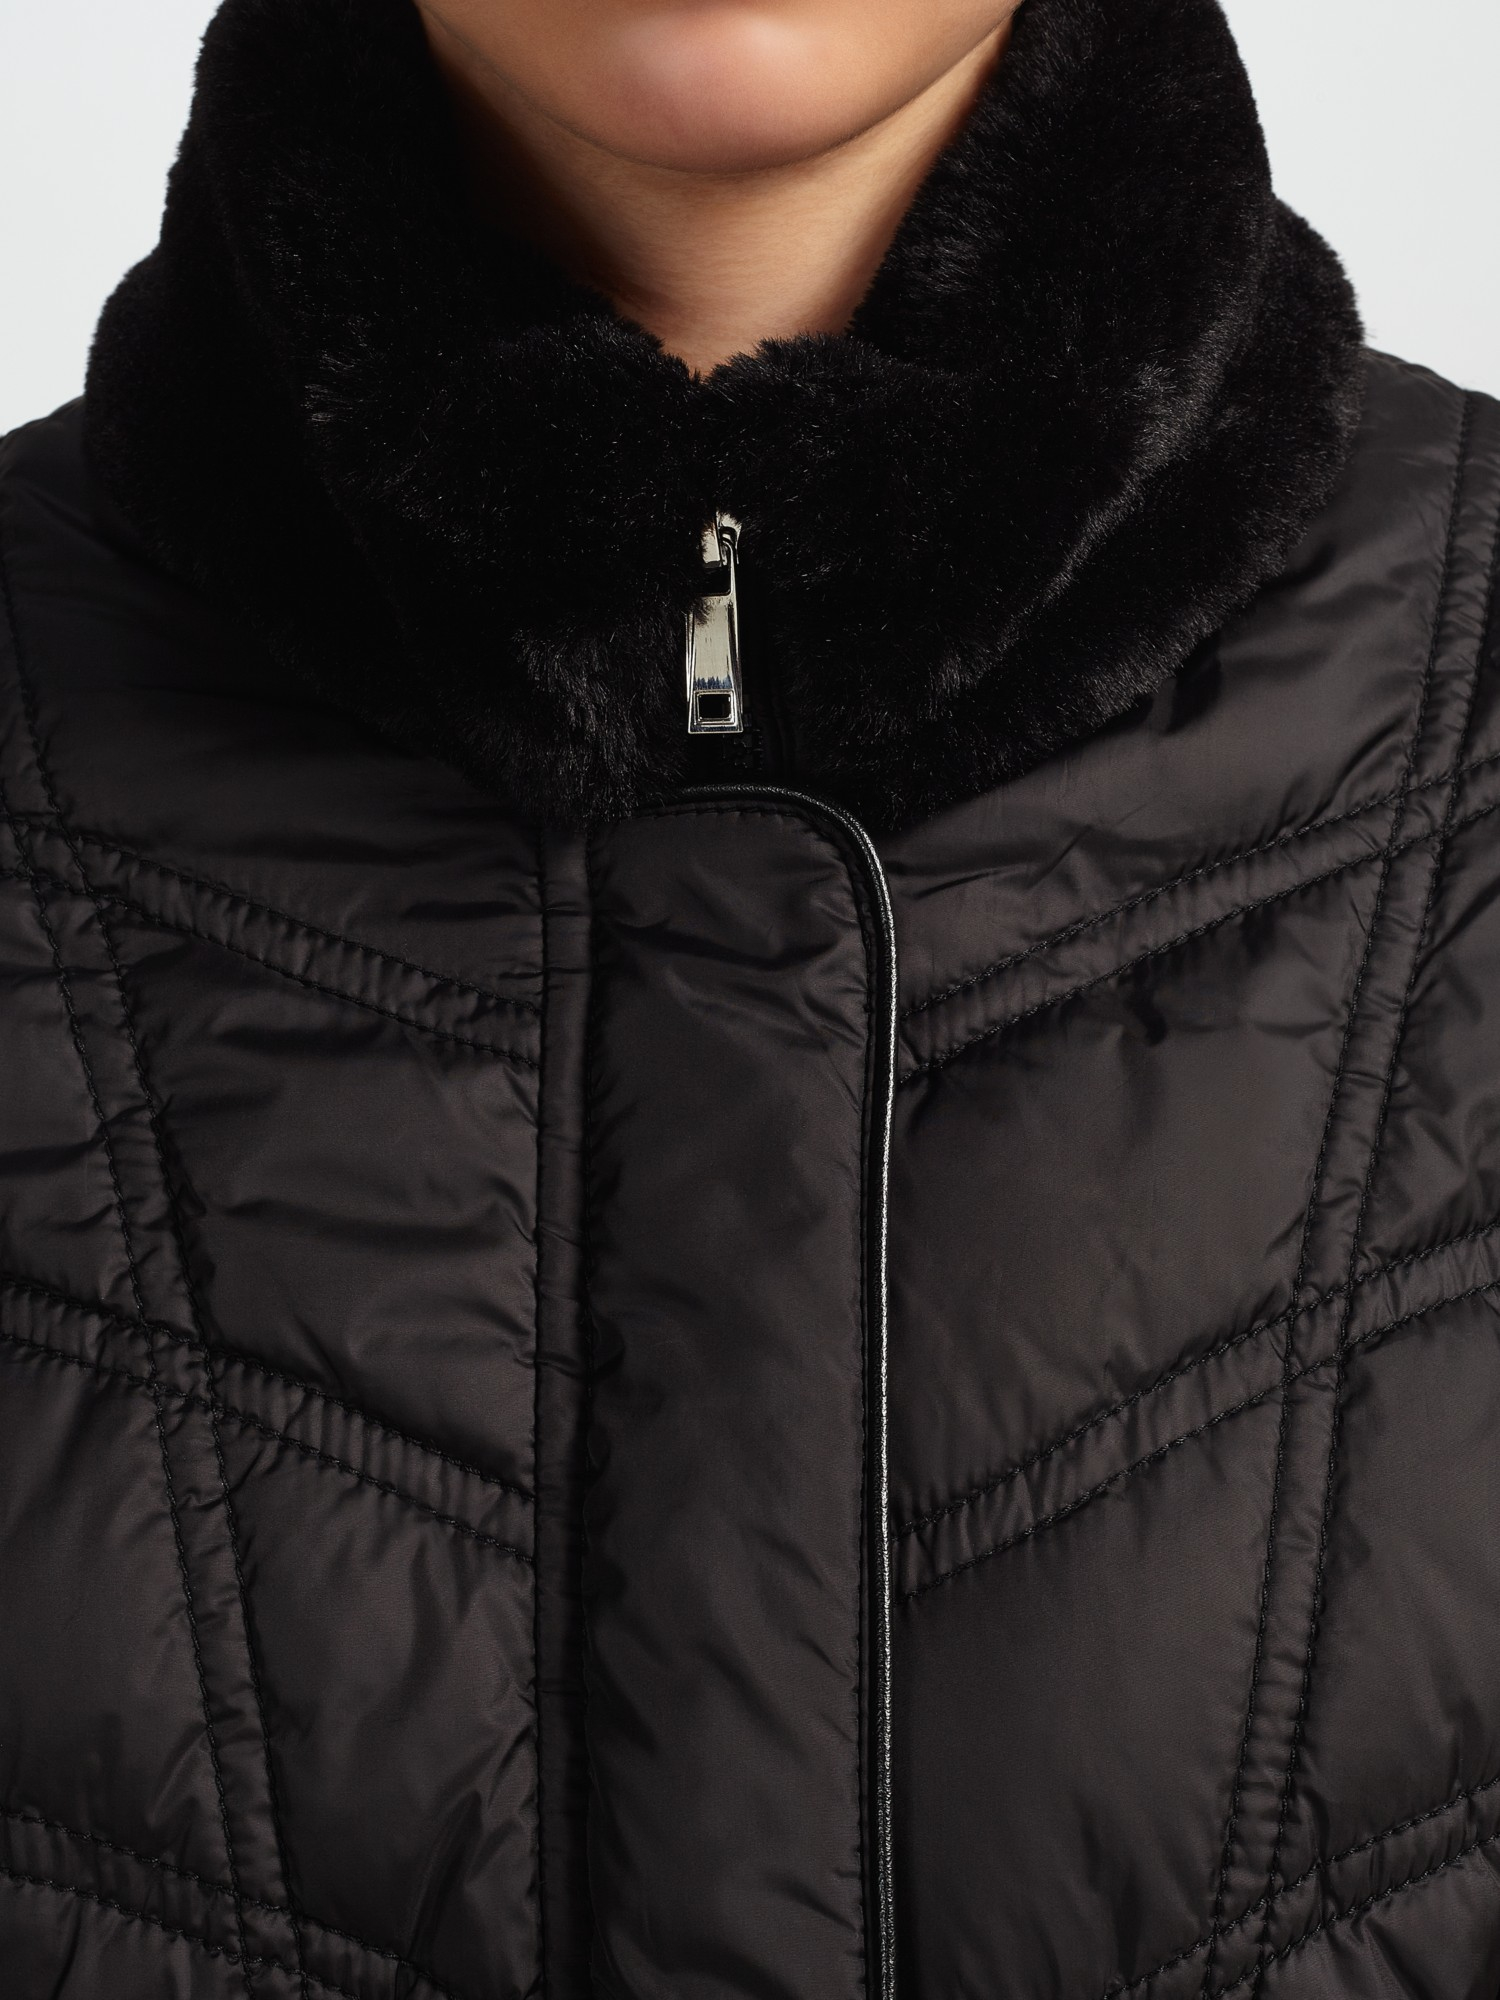 Gerry Weber Quilted Coat in Black - Lyst